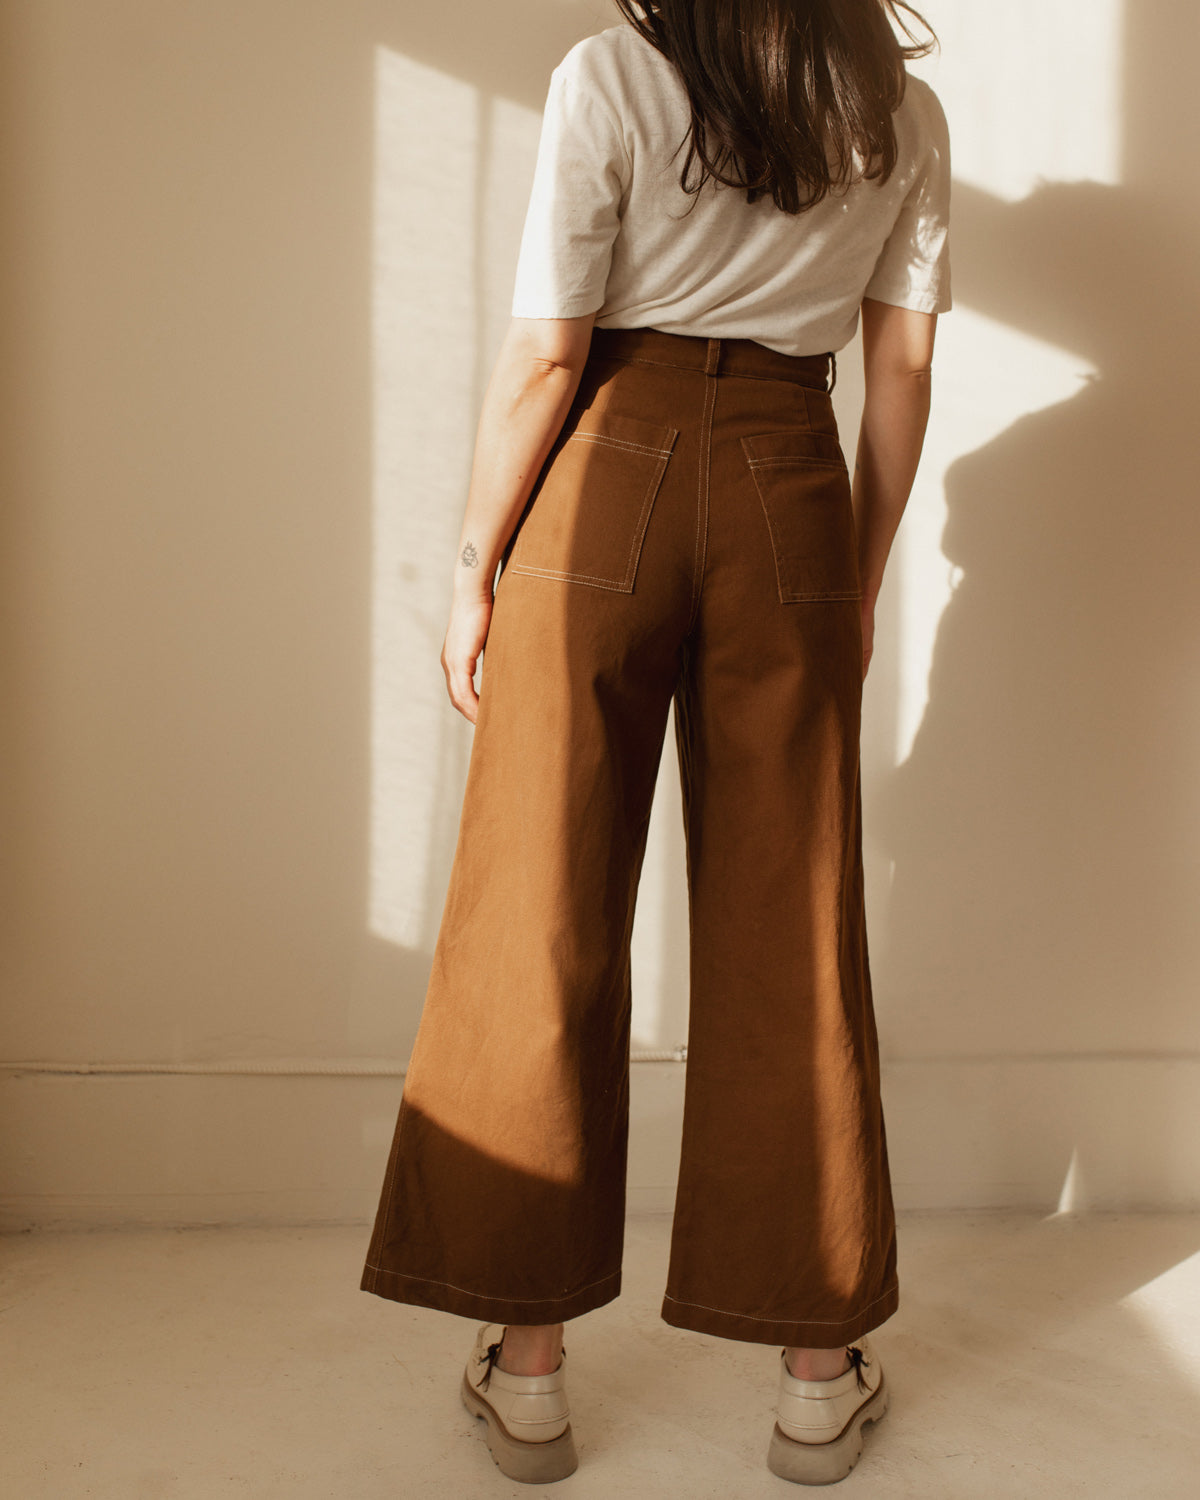 For the ultimate cool girl vibe! Based on Harly Jae's bestselling, form-fitting Pierrot Pants, this new style features a higher waist, unique back pockets, and cool contrast stitching - for a true ode to the 70s era. Handmade with organic cotton blend in Vancouver, BC.